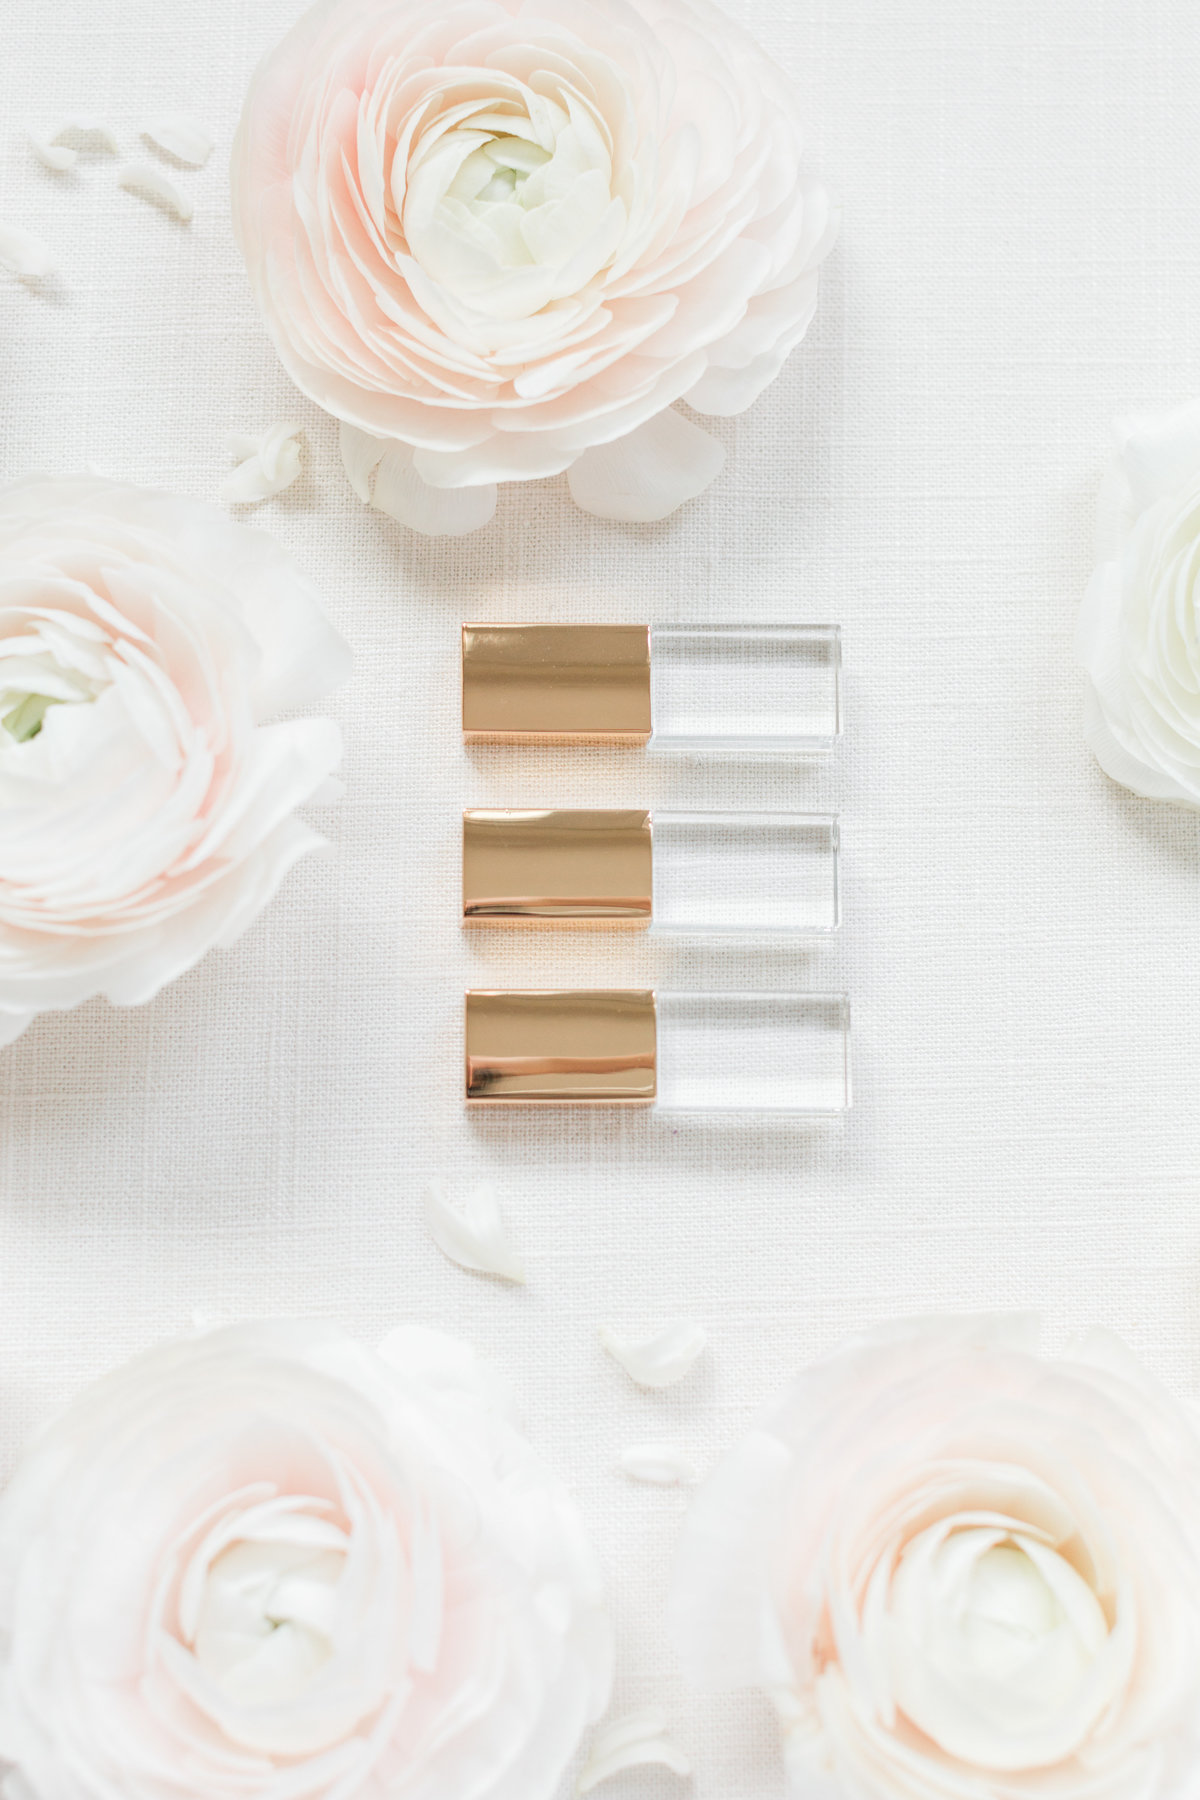 Gold Crystal USBs with flowers